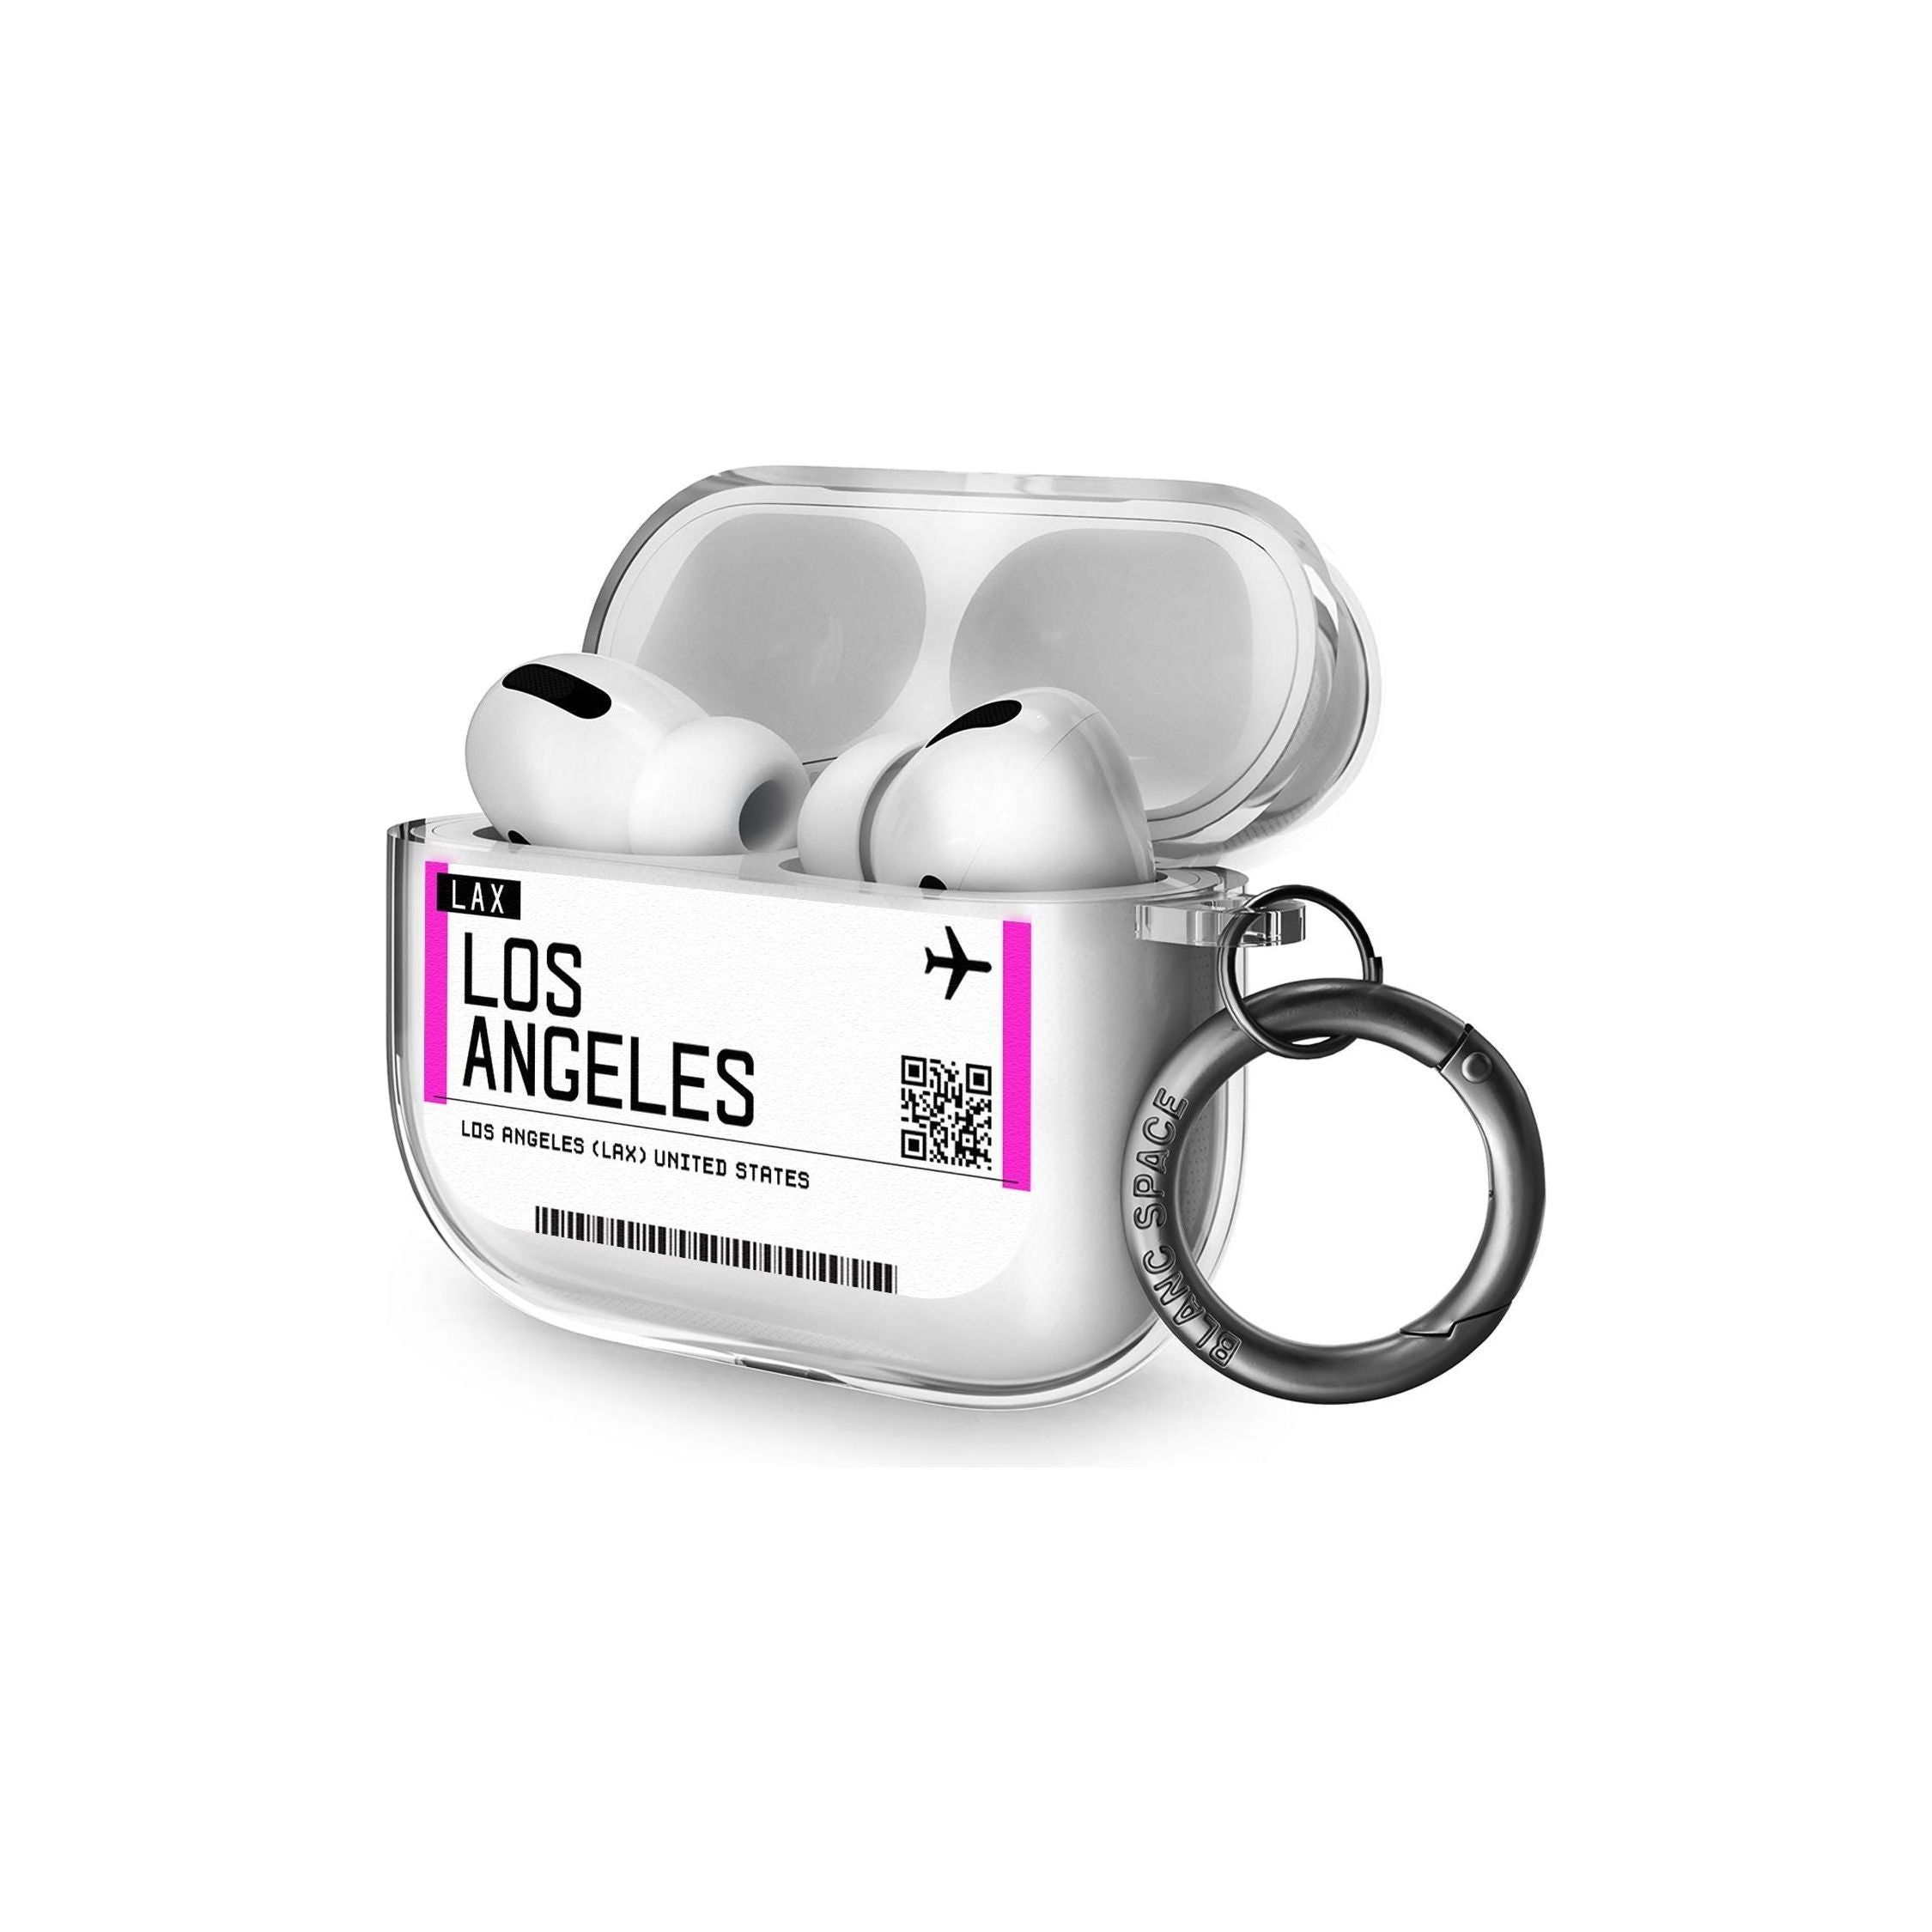 Los Angeles Boarding Pass Airpods Pro Case